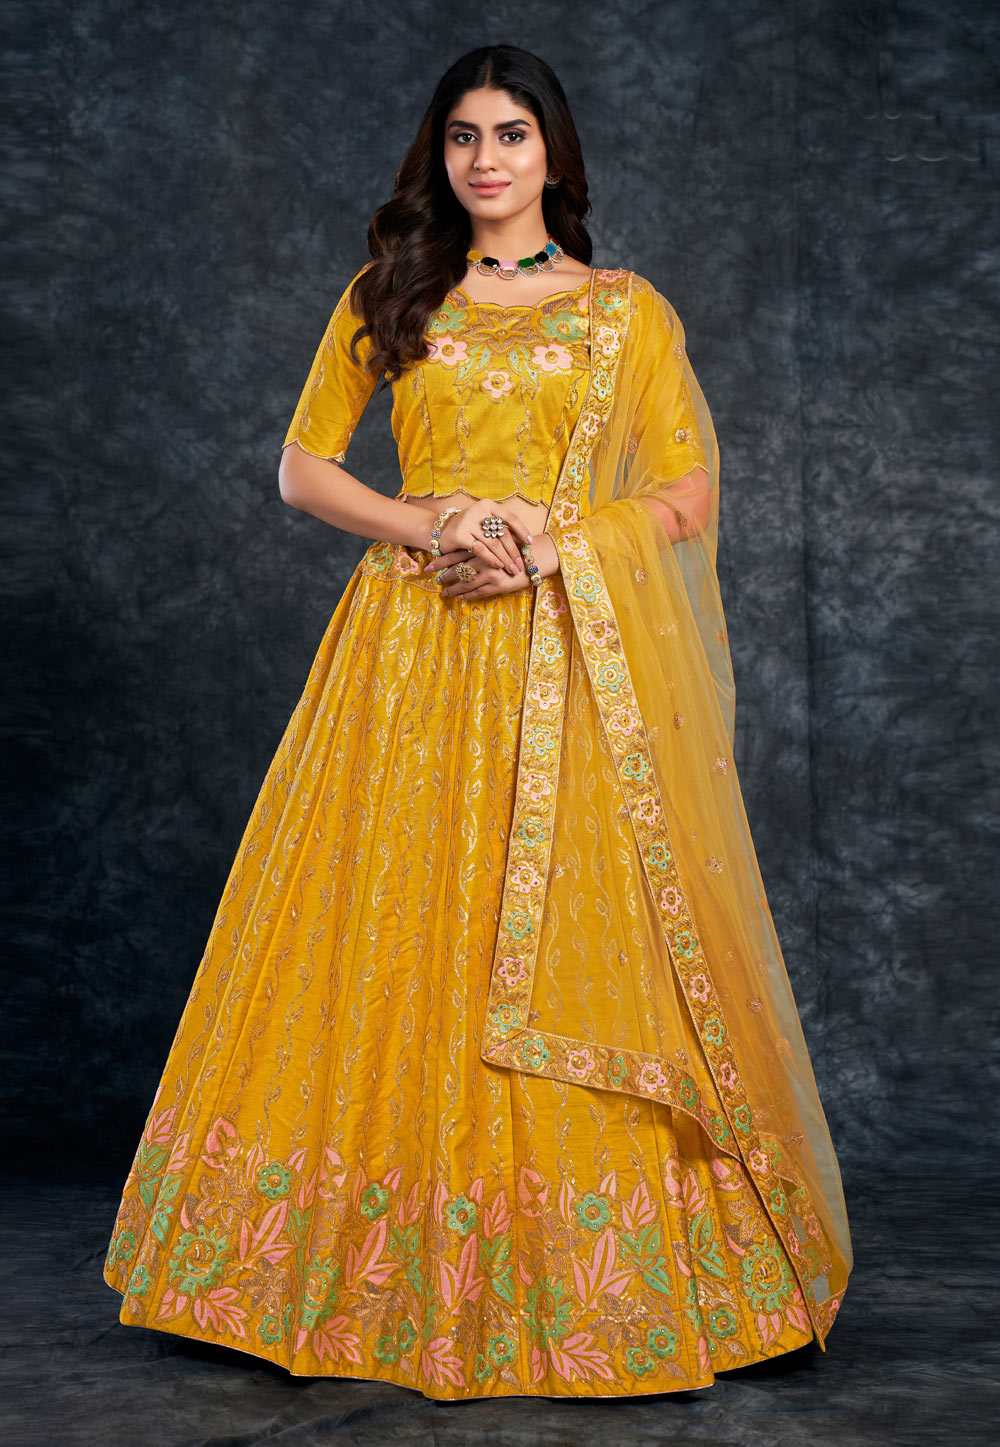 Yellow Colour Embroidered Attractive Party Wear Silk Lehenga Choli LC5 –  𝐋𝐎𝐎𝐊𝐒 𝐀𝐍𝐃 𝐋𝐈𝐊𝐄𝐒